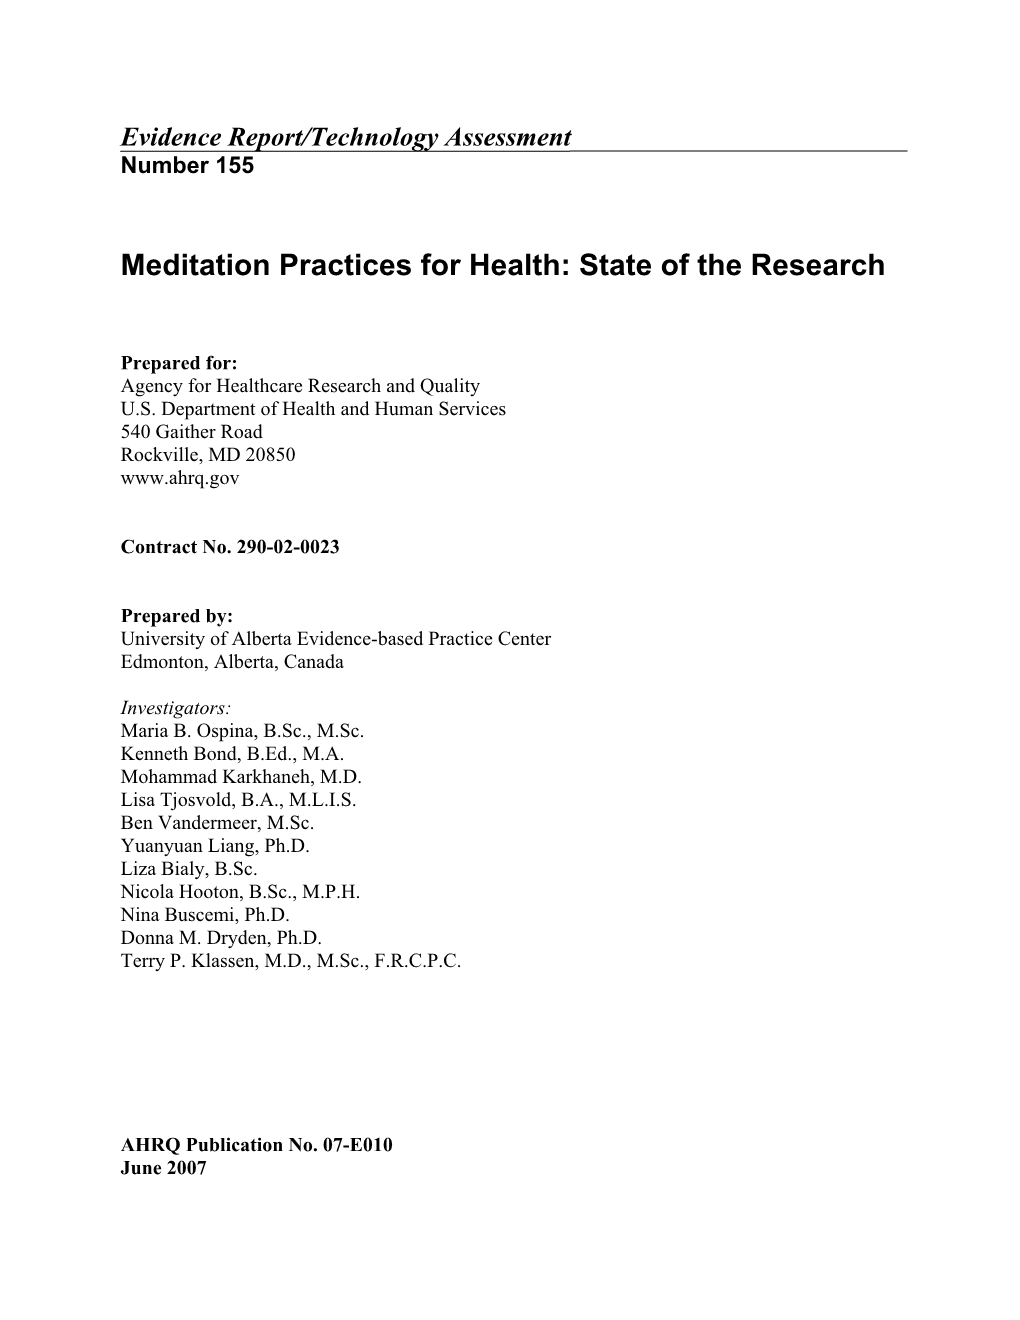 Meditation Practices for Health: State of the Research